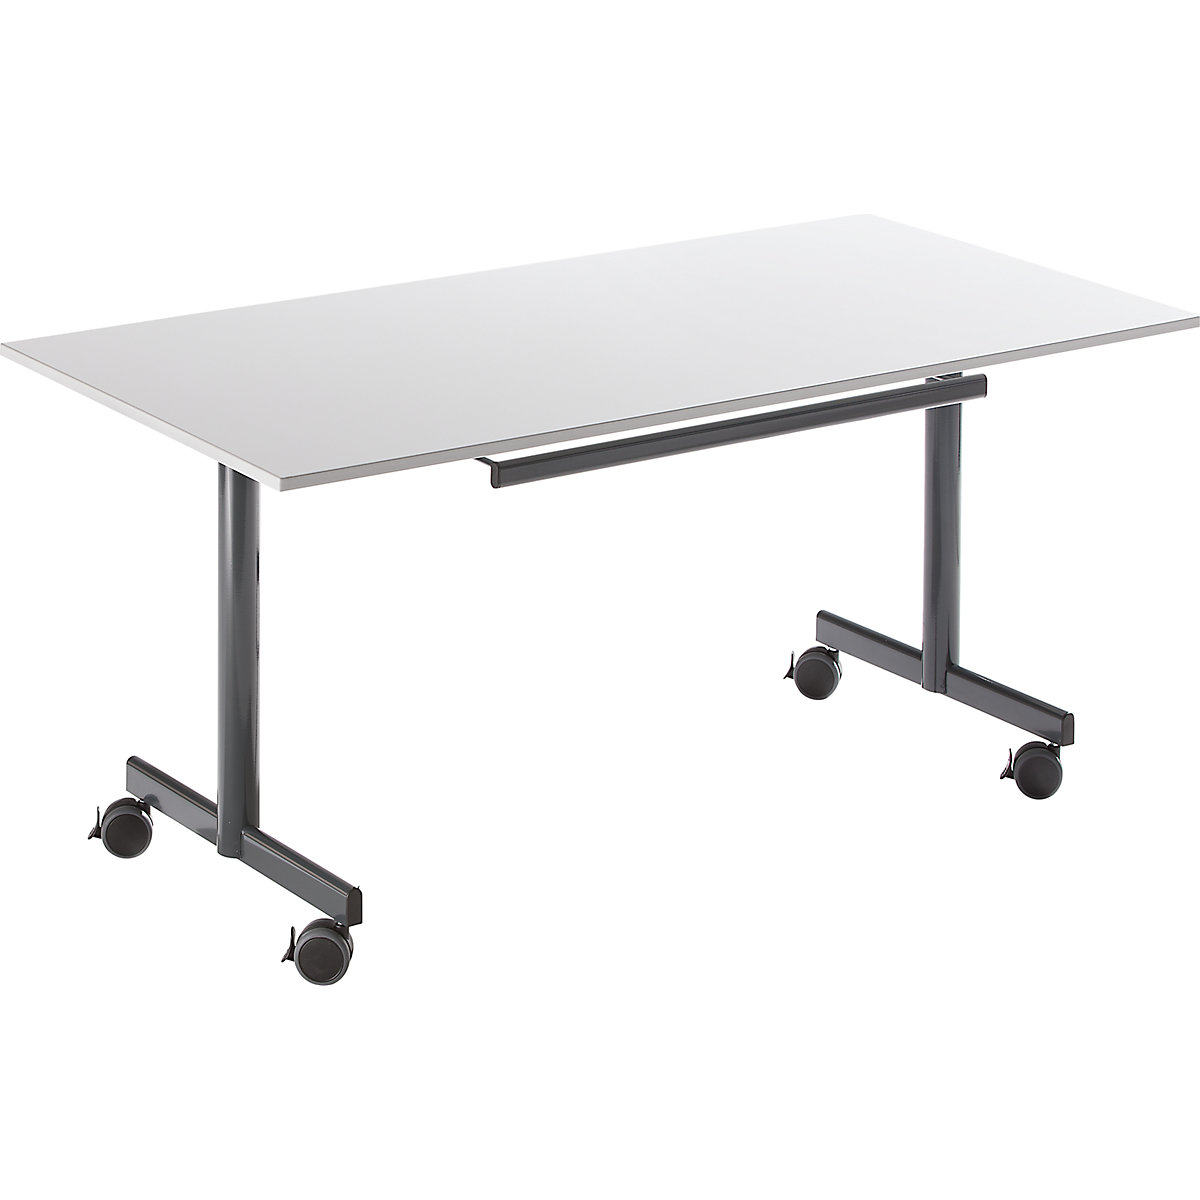 Table with folding top, mobile